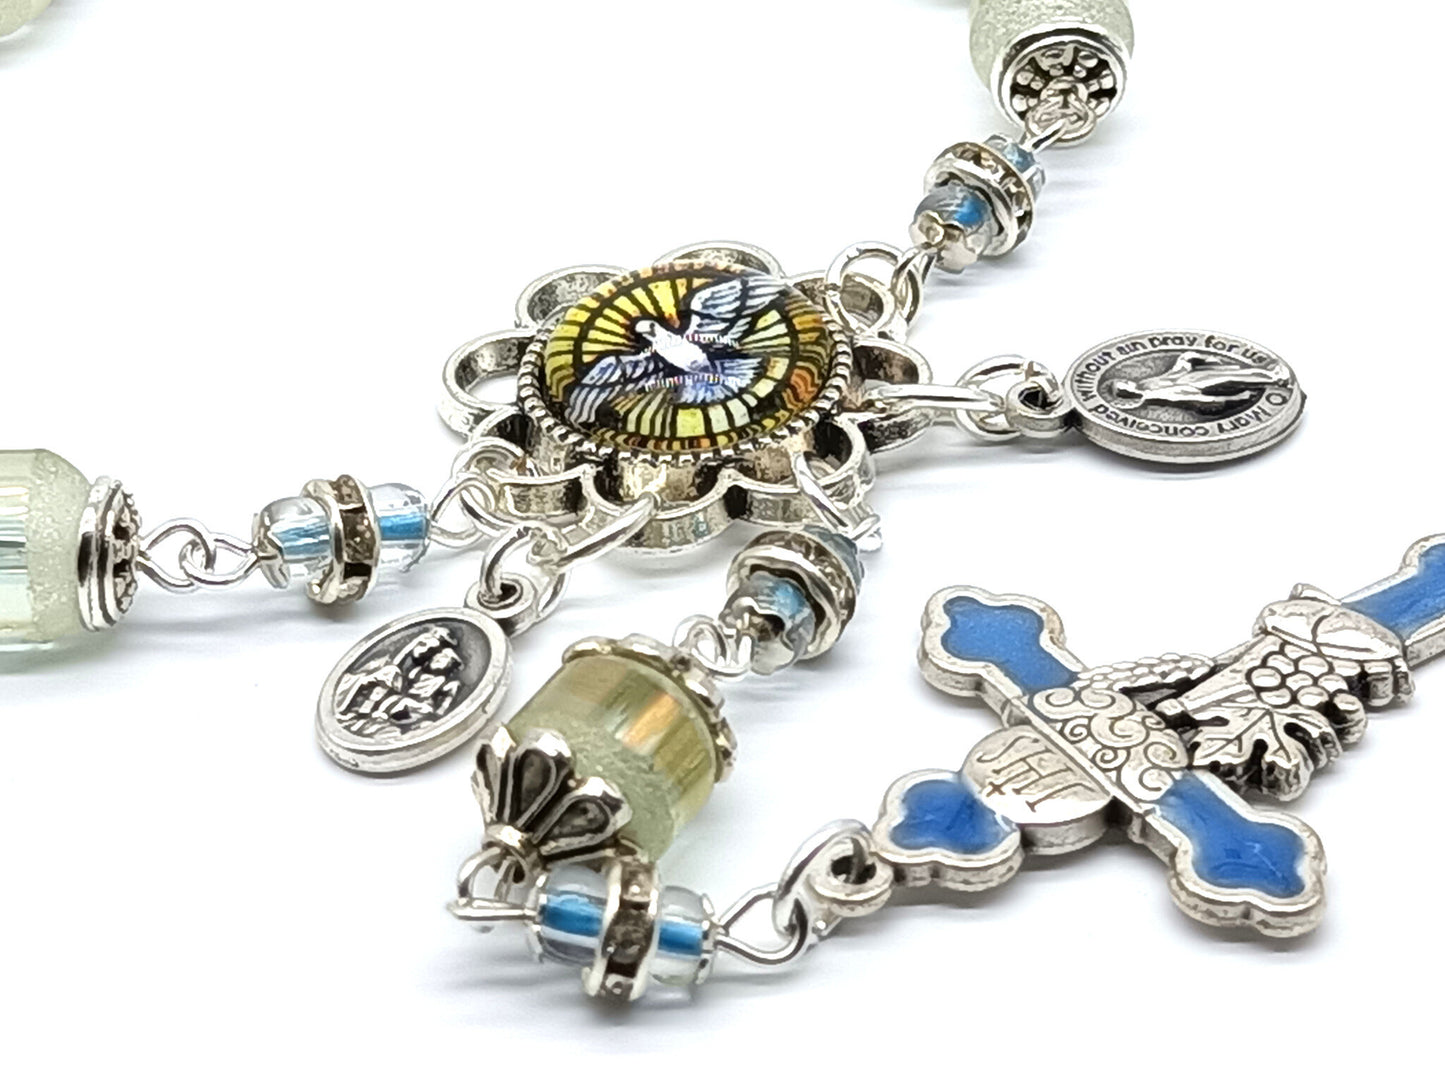 Holy Spirit unique rosary beads single decade with frosted glass beads, silver and blue enamel crucifix, silver Holy Spirit picture centre medal and small miraculous medal.